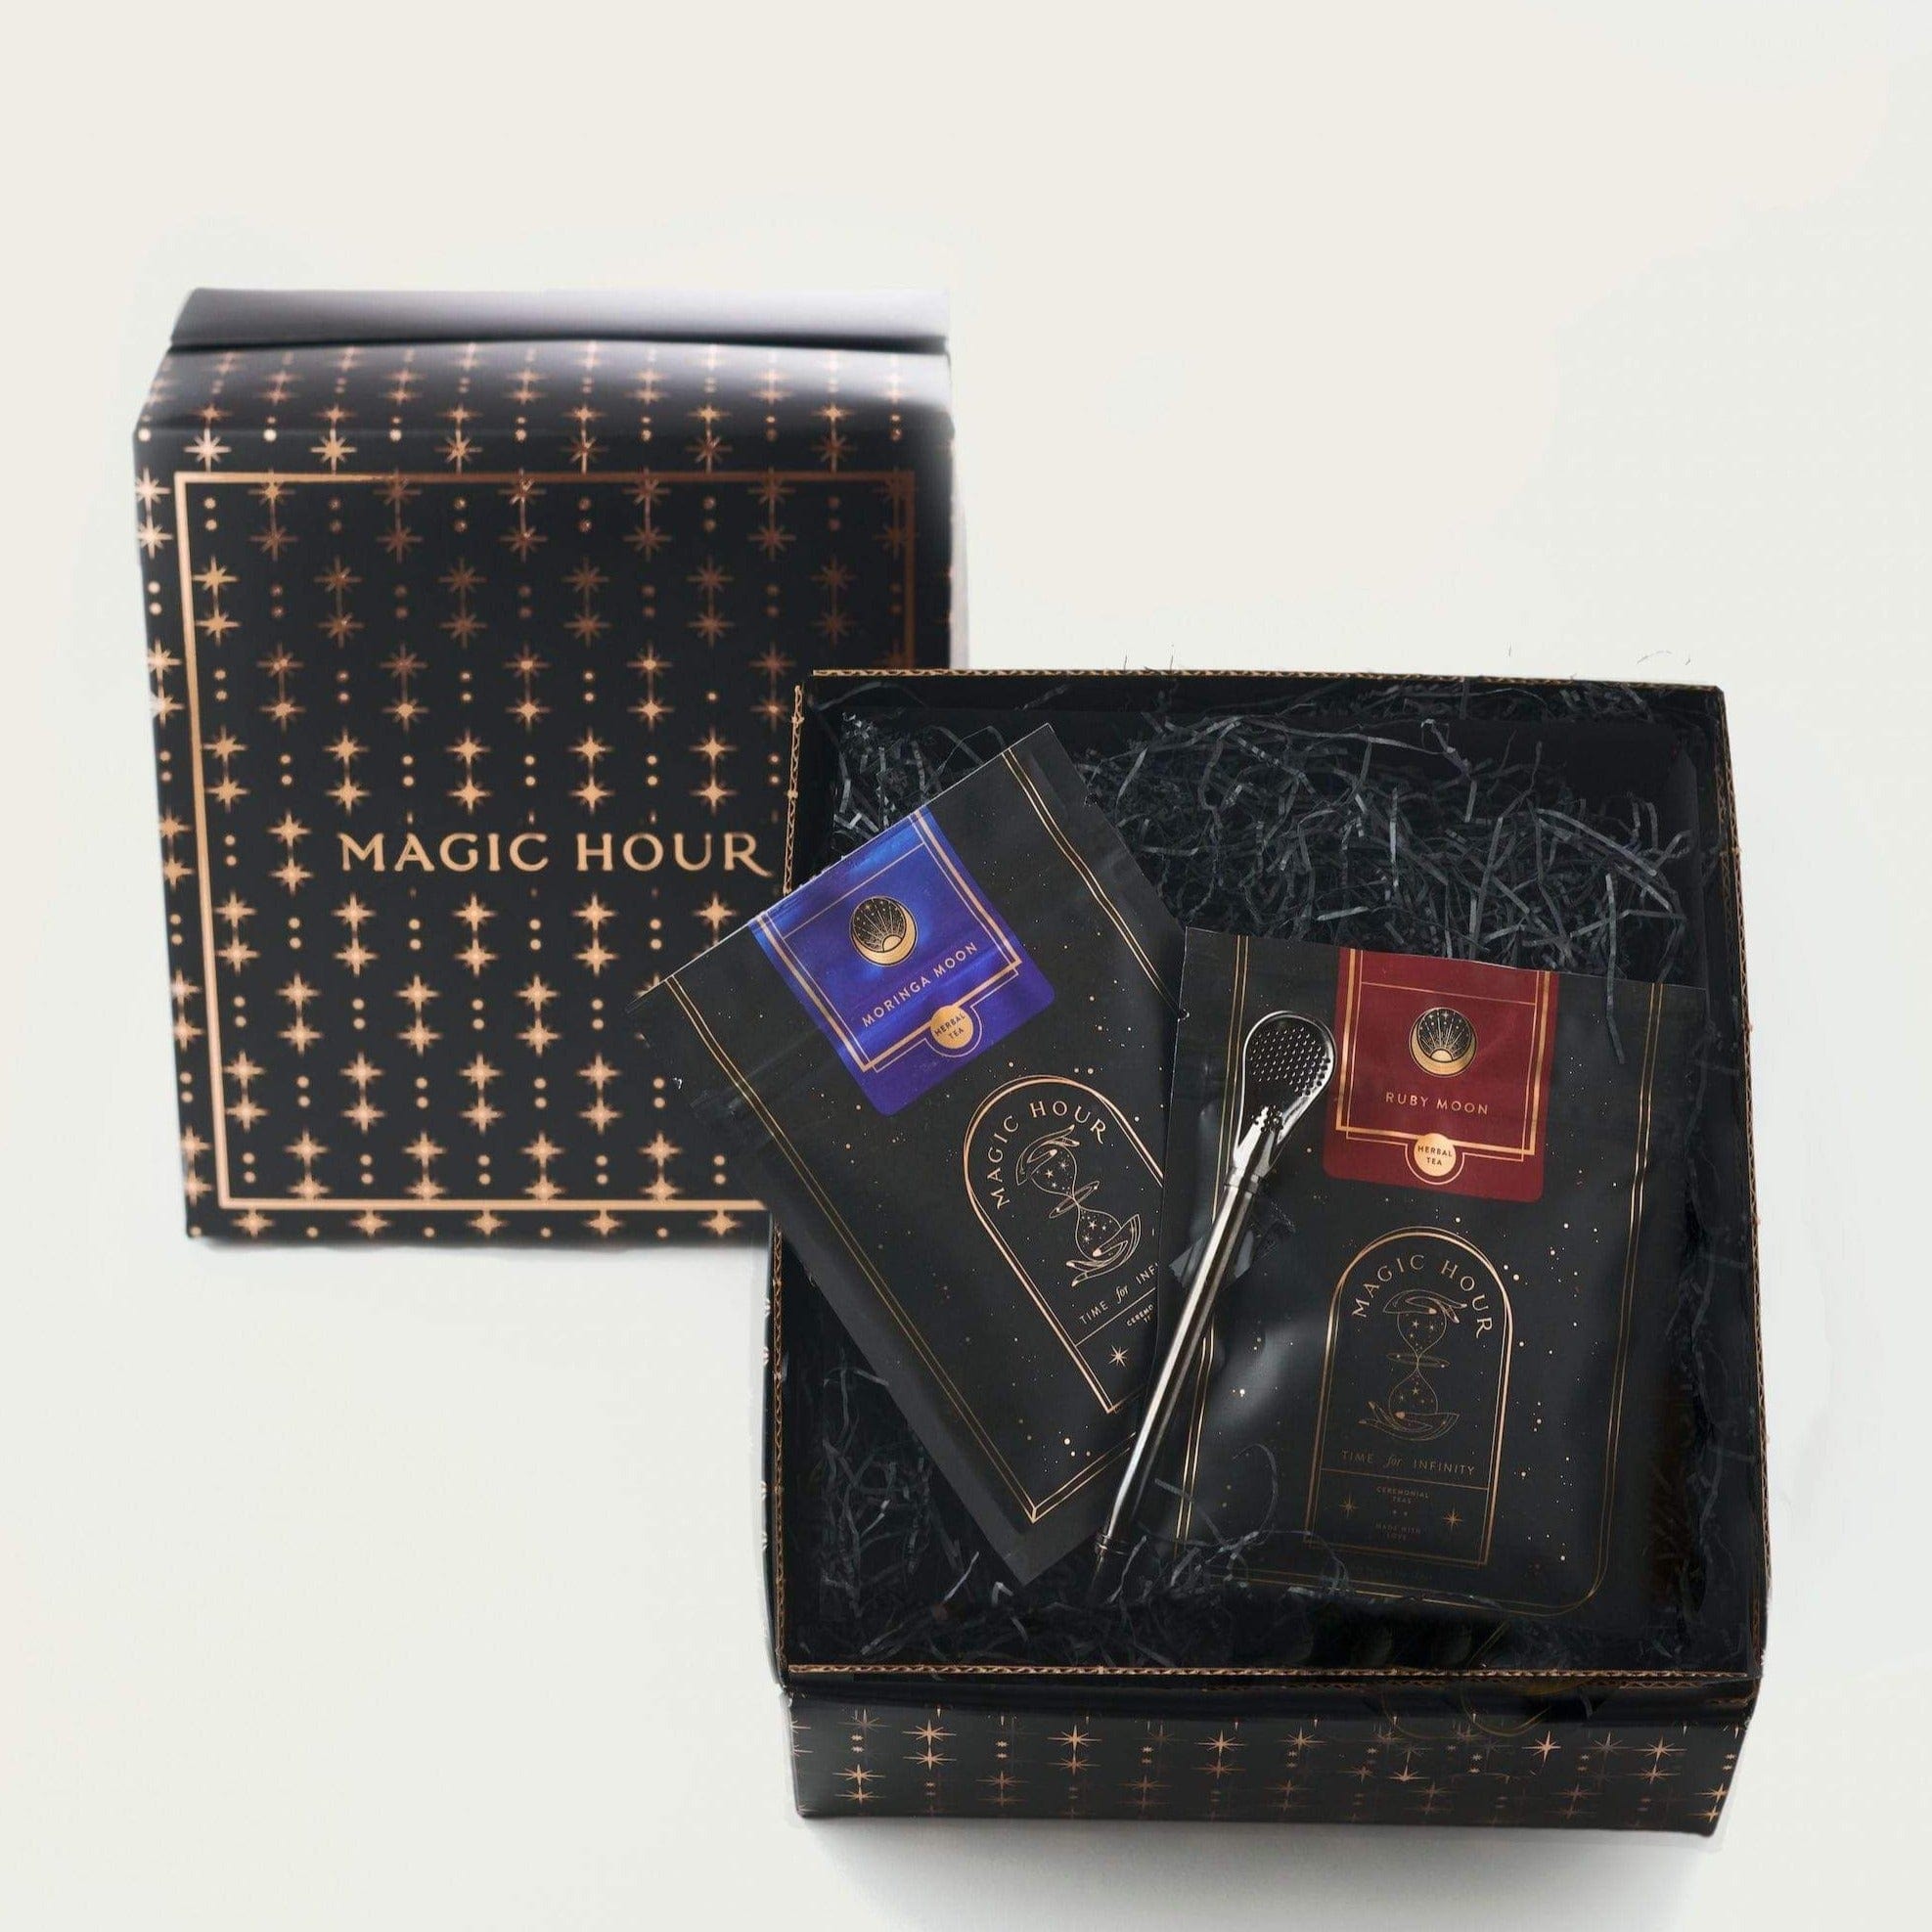 A gift box with a starry black design labeled "Magic Hour" on the lid contains two packets of luxurious loose leaf tea and a tea infuser. One packet is labeled "Blue Moon" and the other "Ruby Moon," both featuring elegant designs. The items are nestled in shredded black paper, making it the perfect Moon Lover: Herbal Immunitea Ritual Gift from Magic Hour.